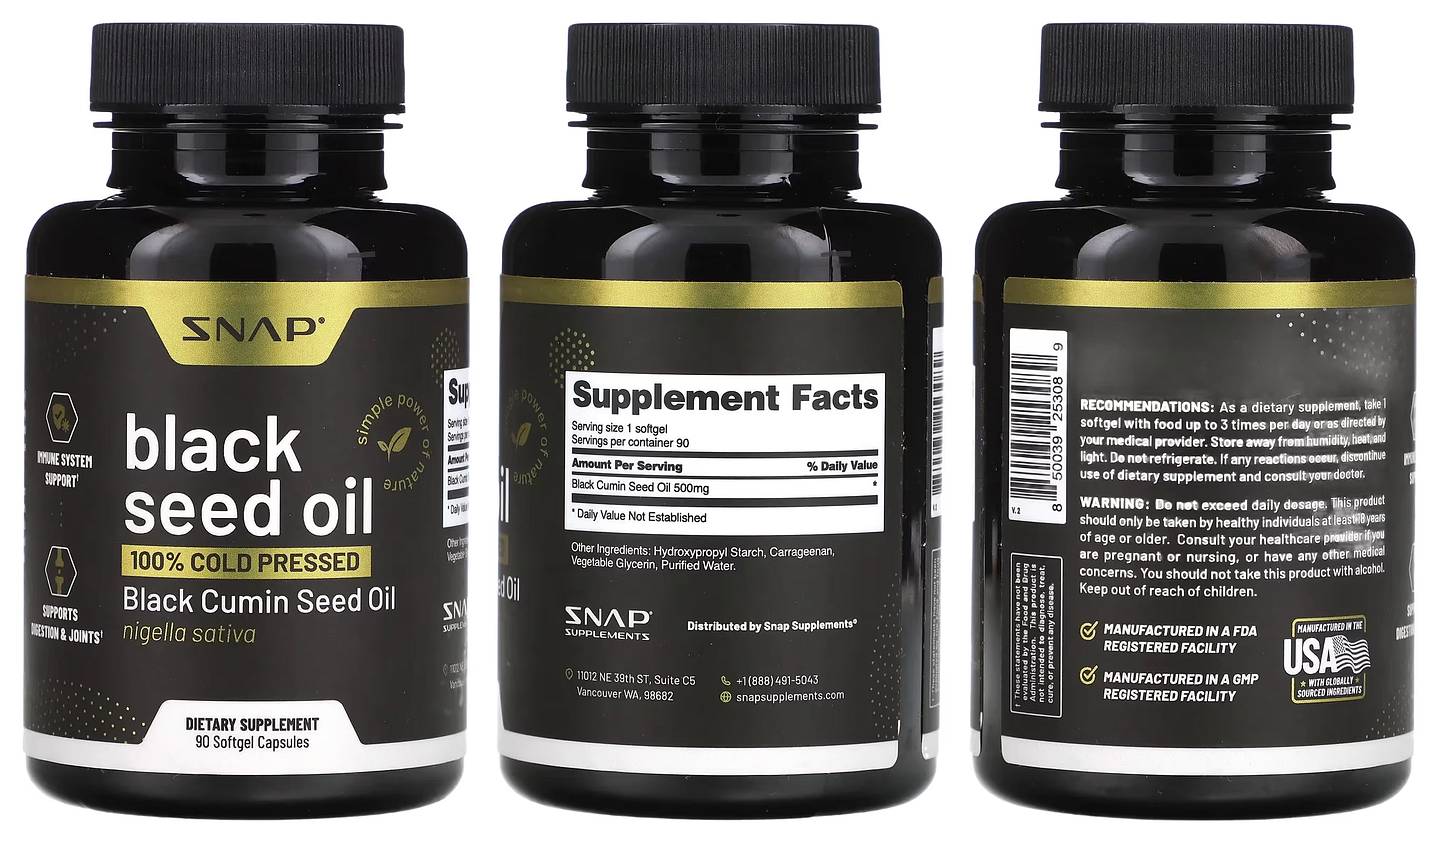 Snap Supplements, Black Seed Oil packaging